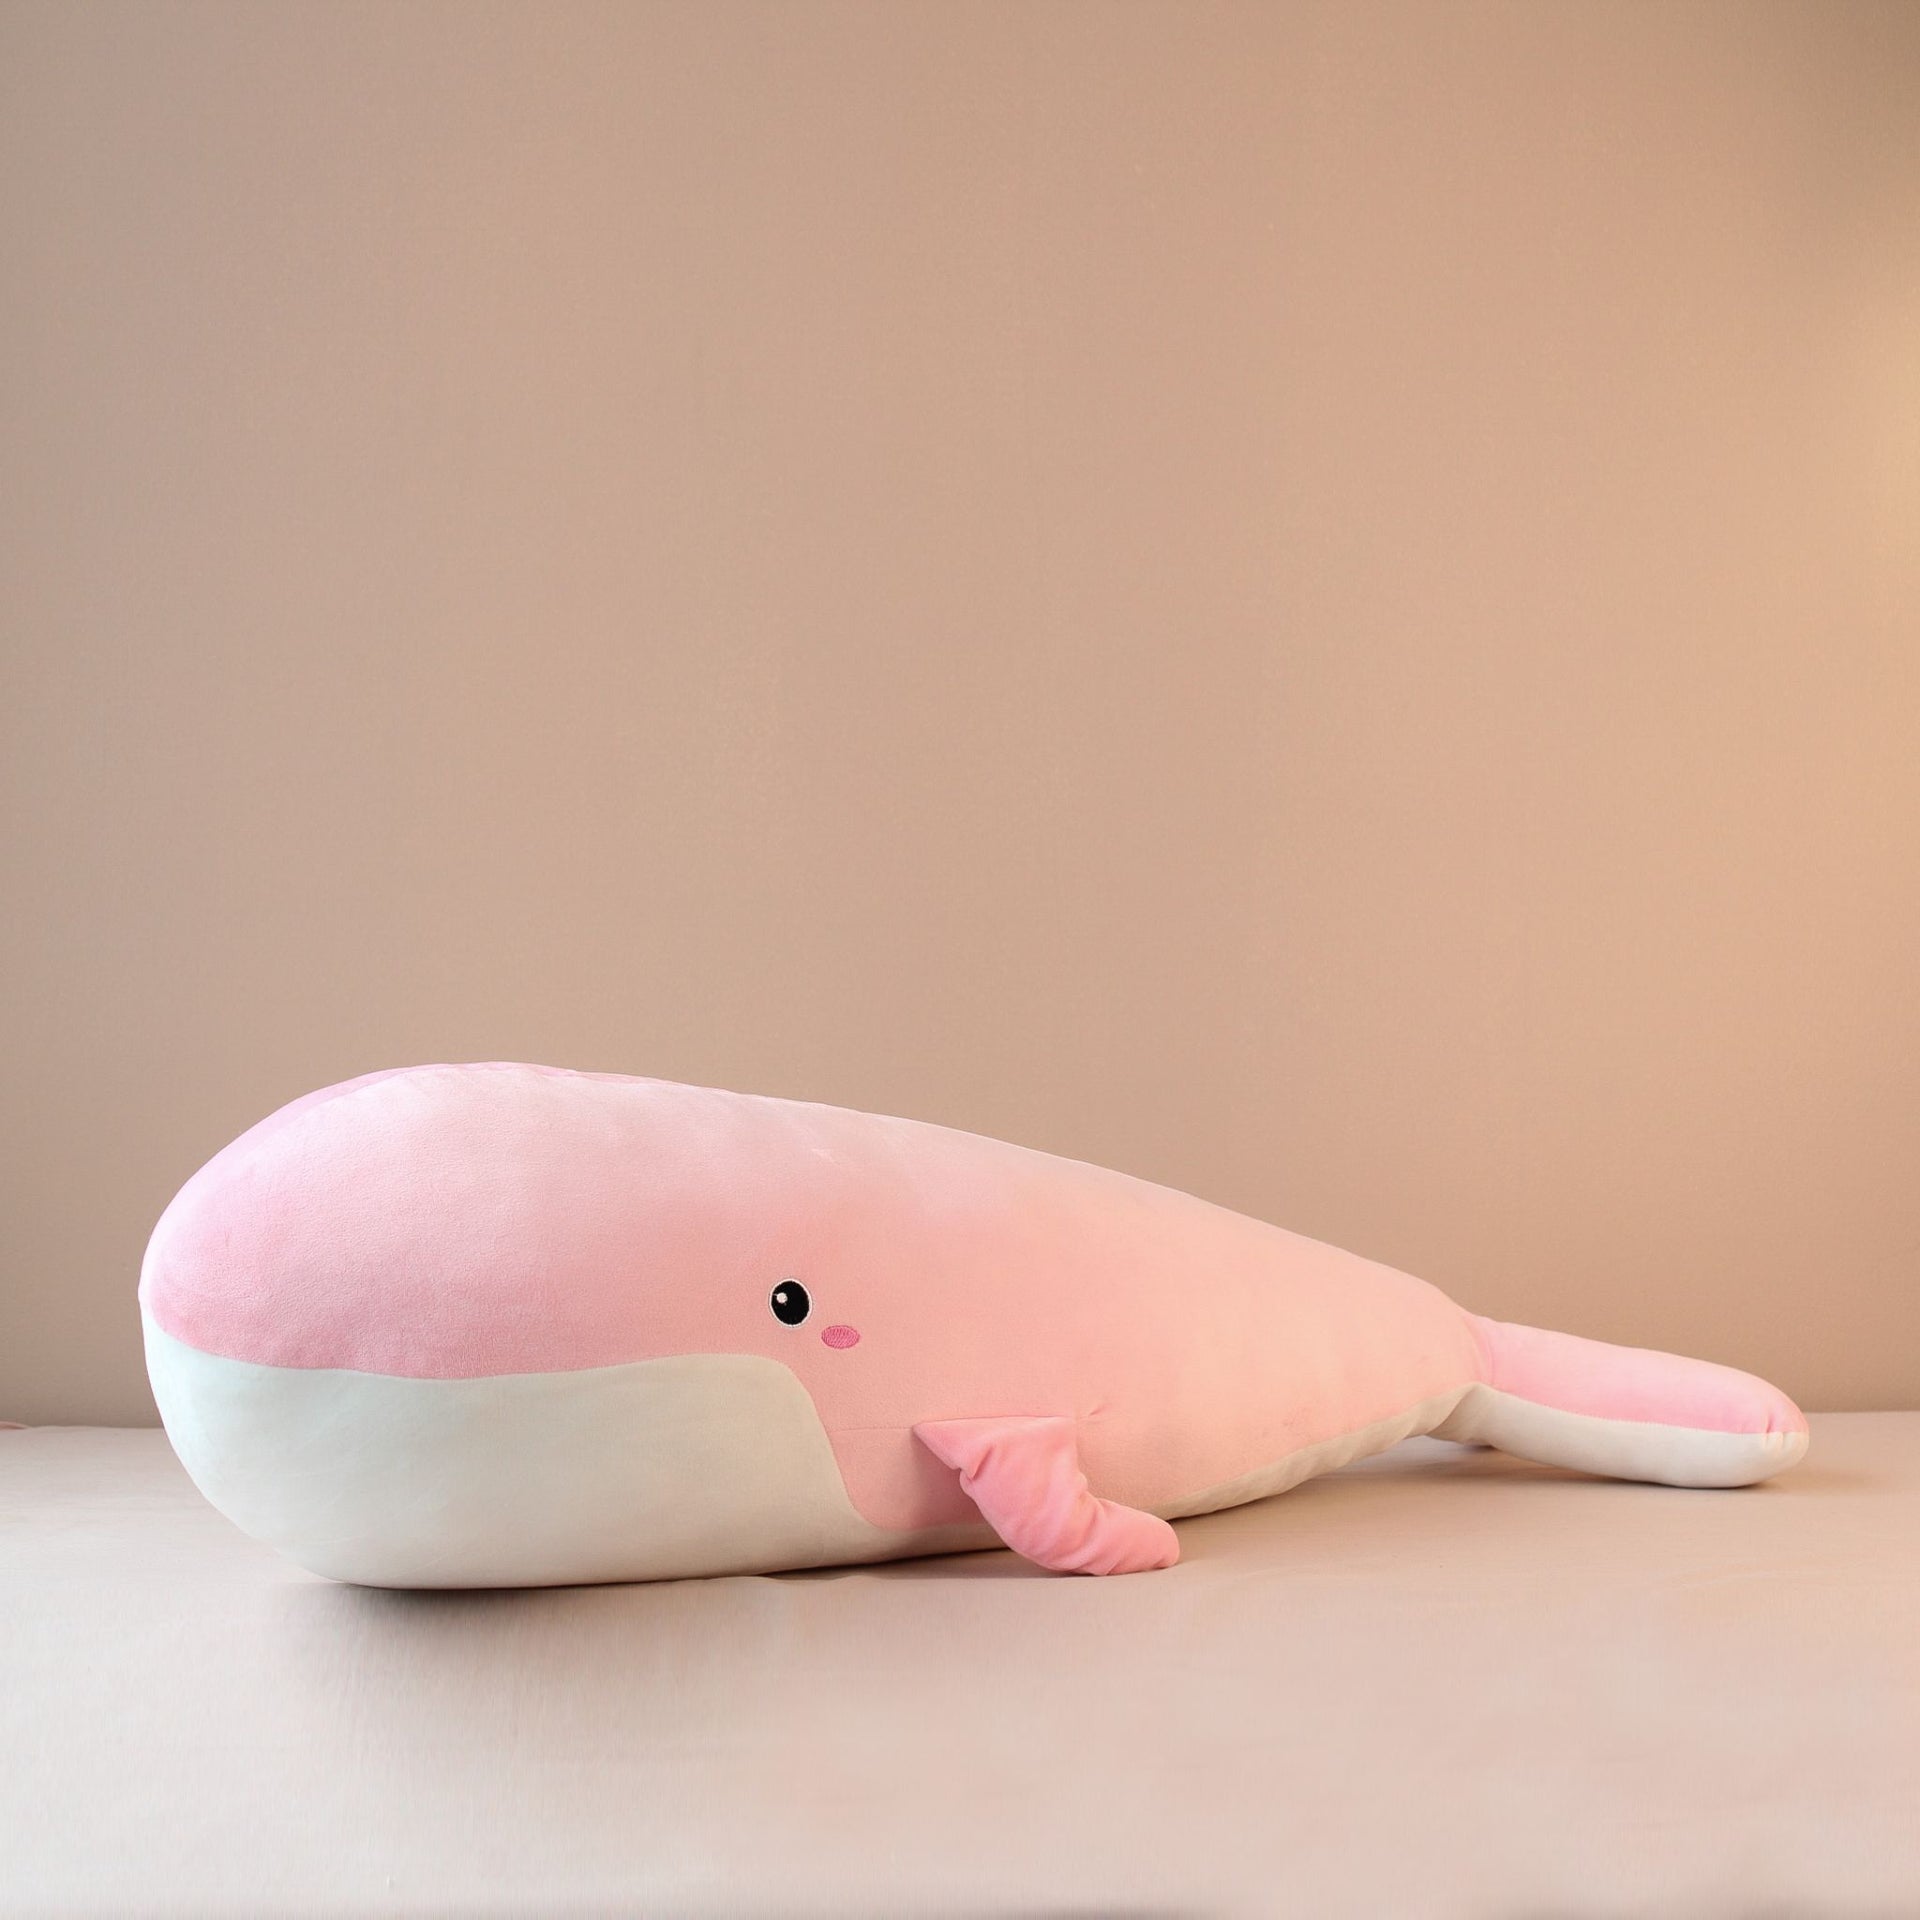 Fluffy Giant Huggable Cute Pink Whale Body Pillow Plush Toy